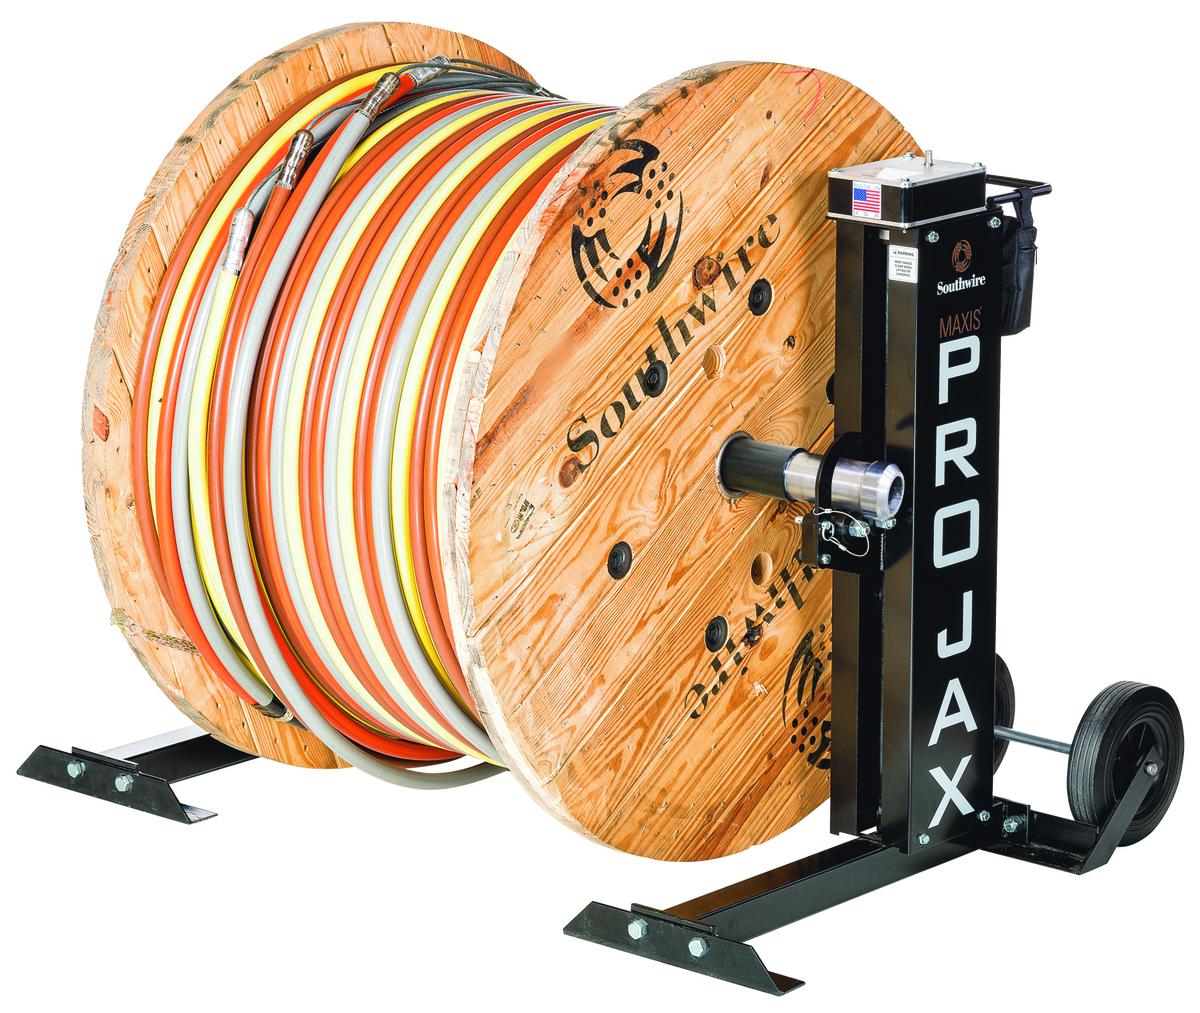 Best Powered Cable Reel Stand Manufacturer